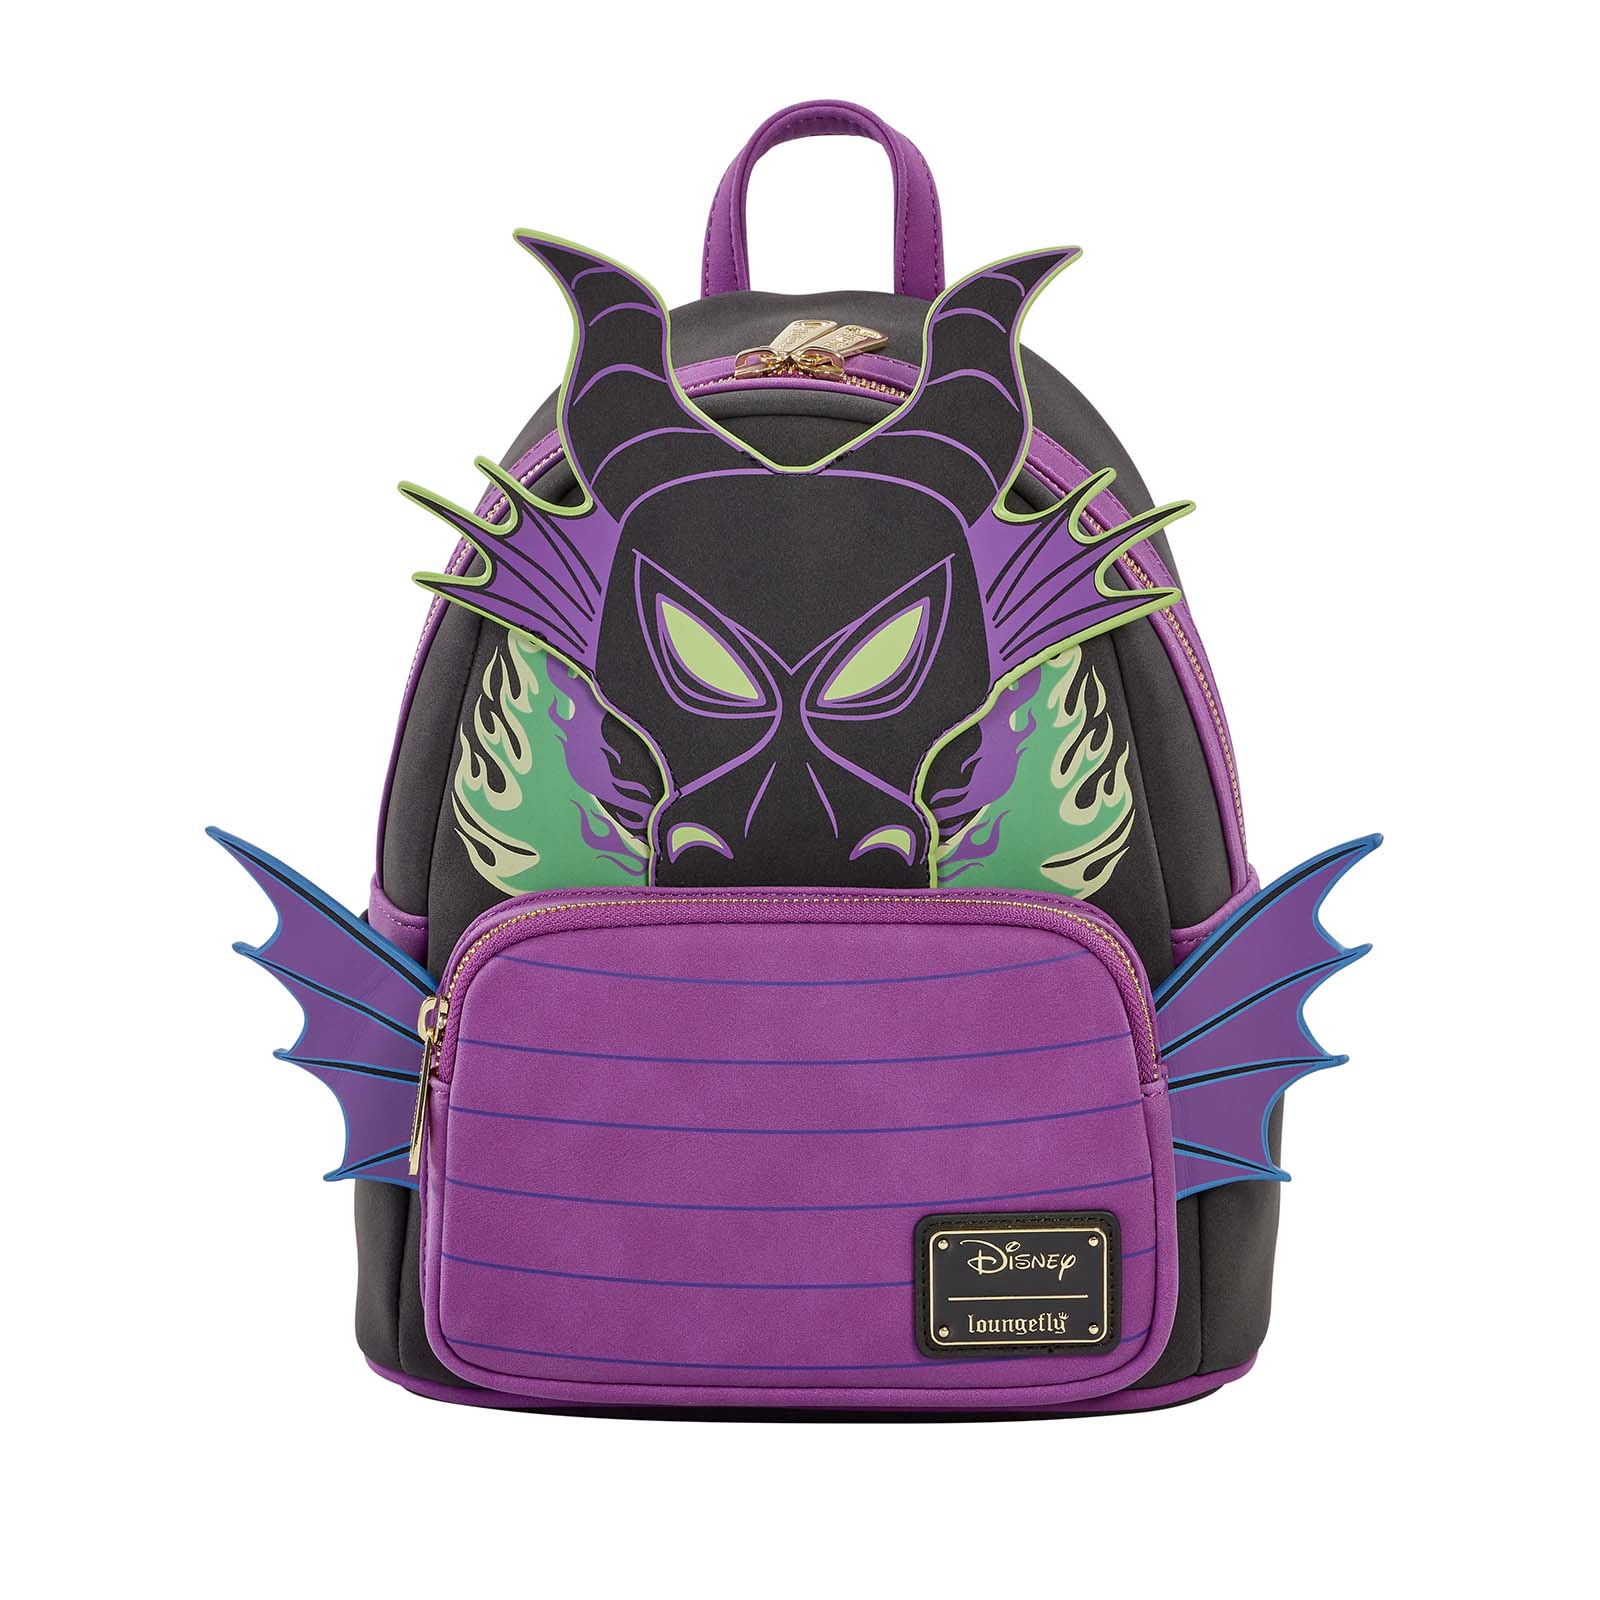 2022 Exclusive Loungefly Maleficent Dragon Sequin Mini Backpack Sold Out NWT